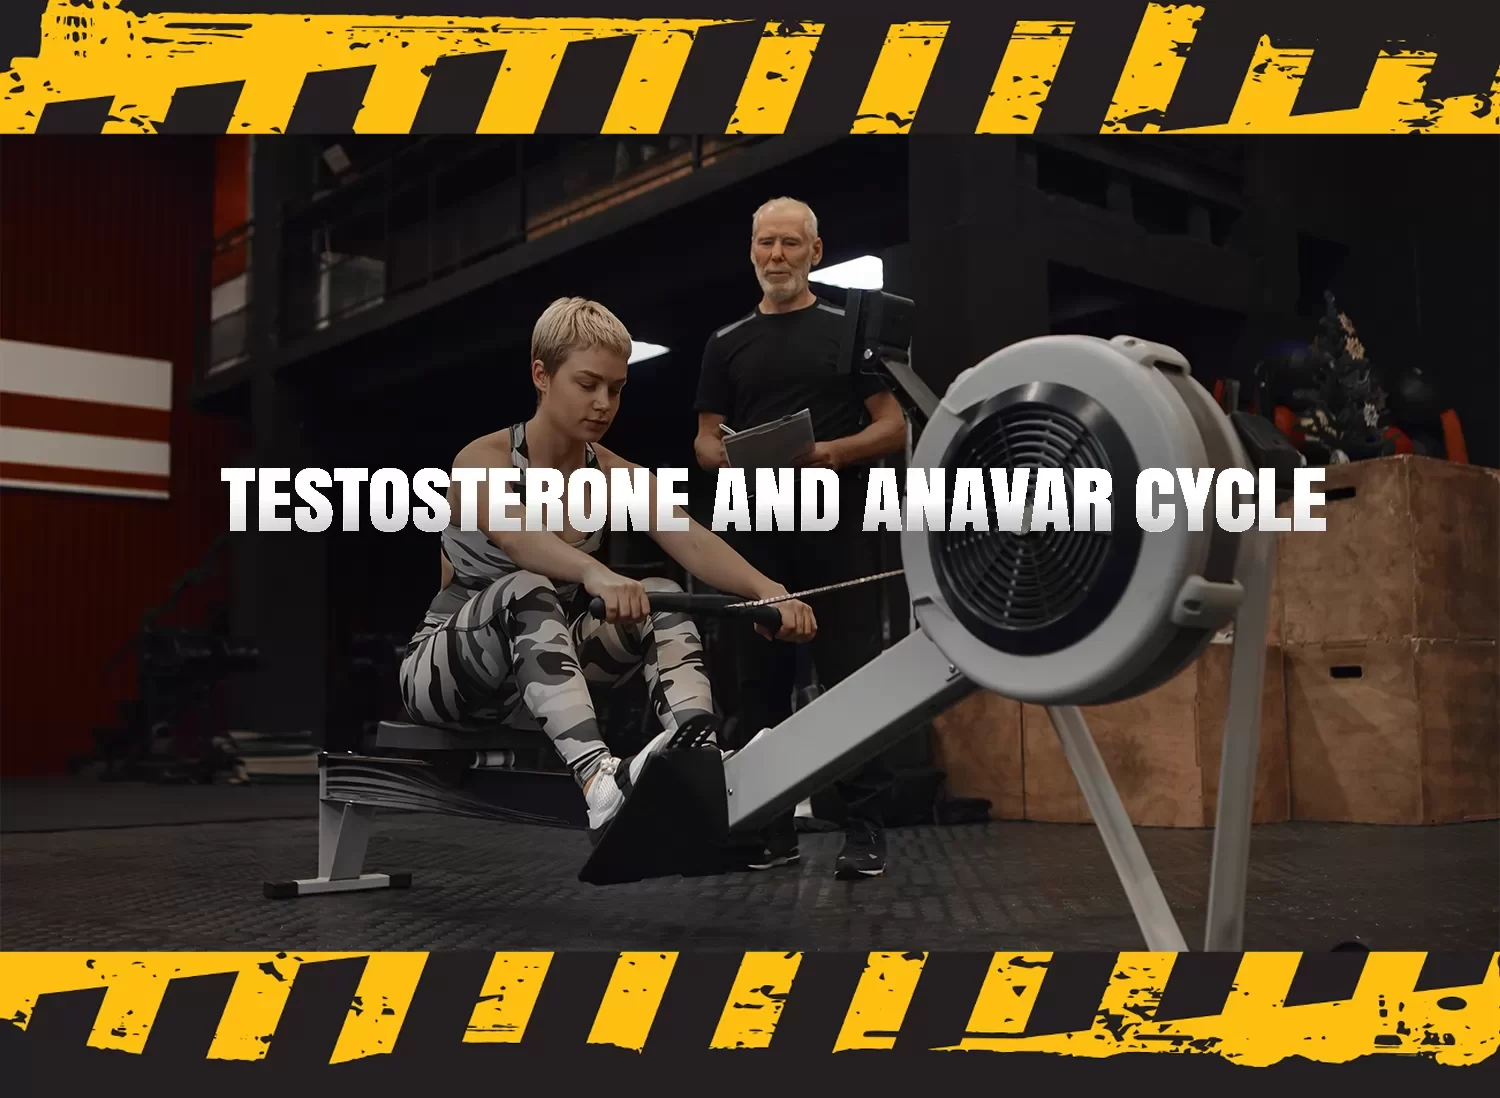 Testosterone and Anavar Cycle